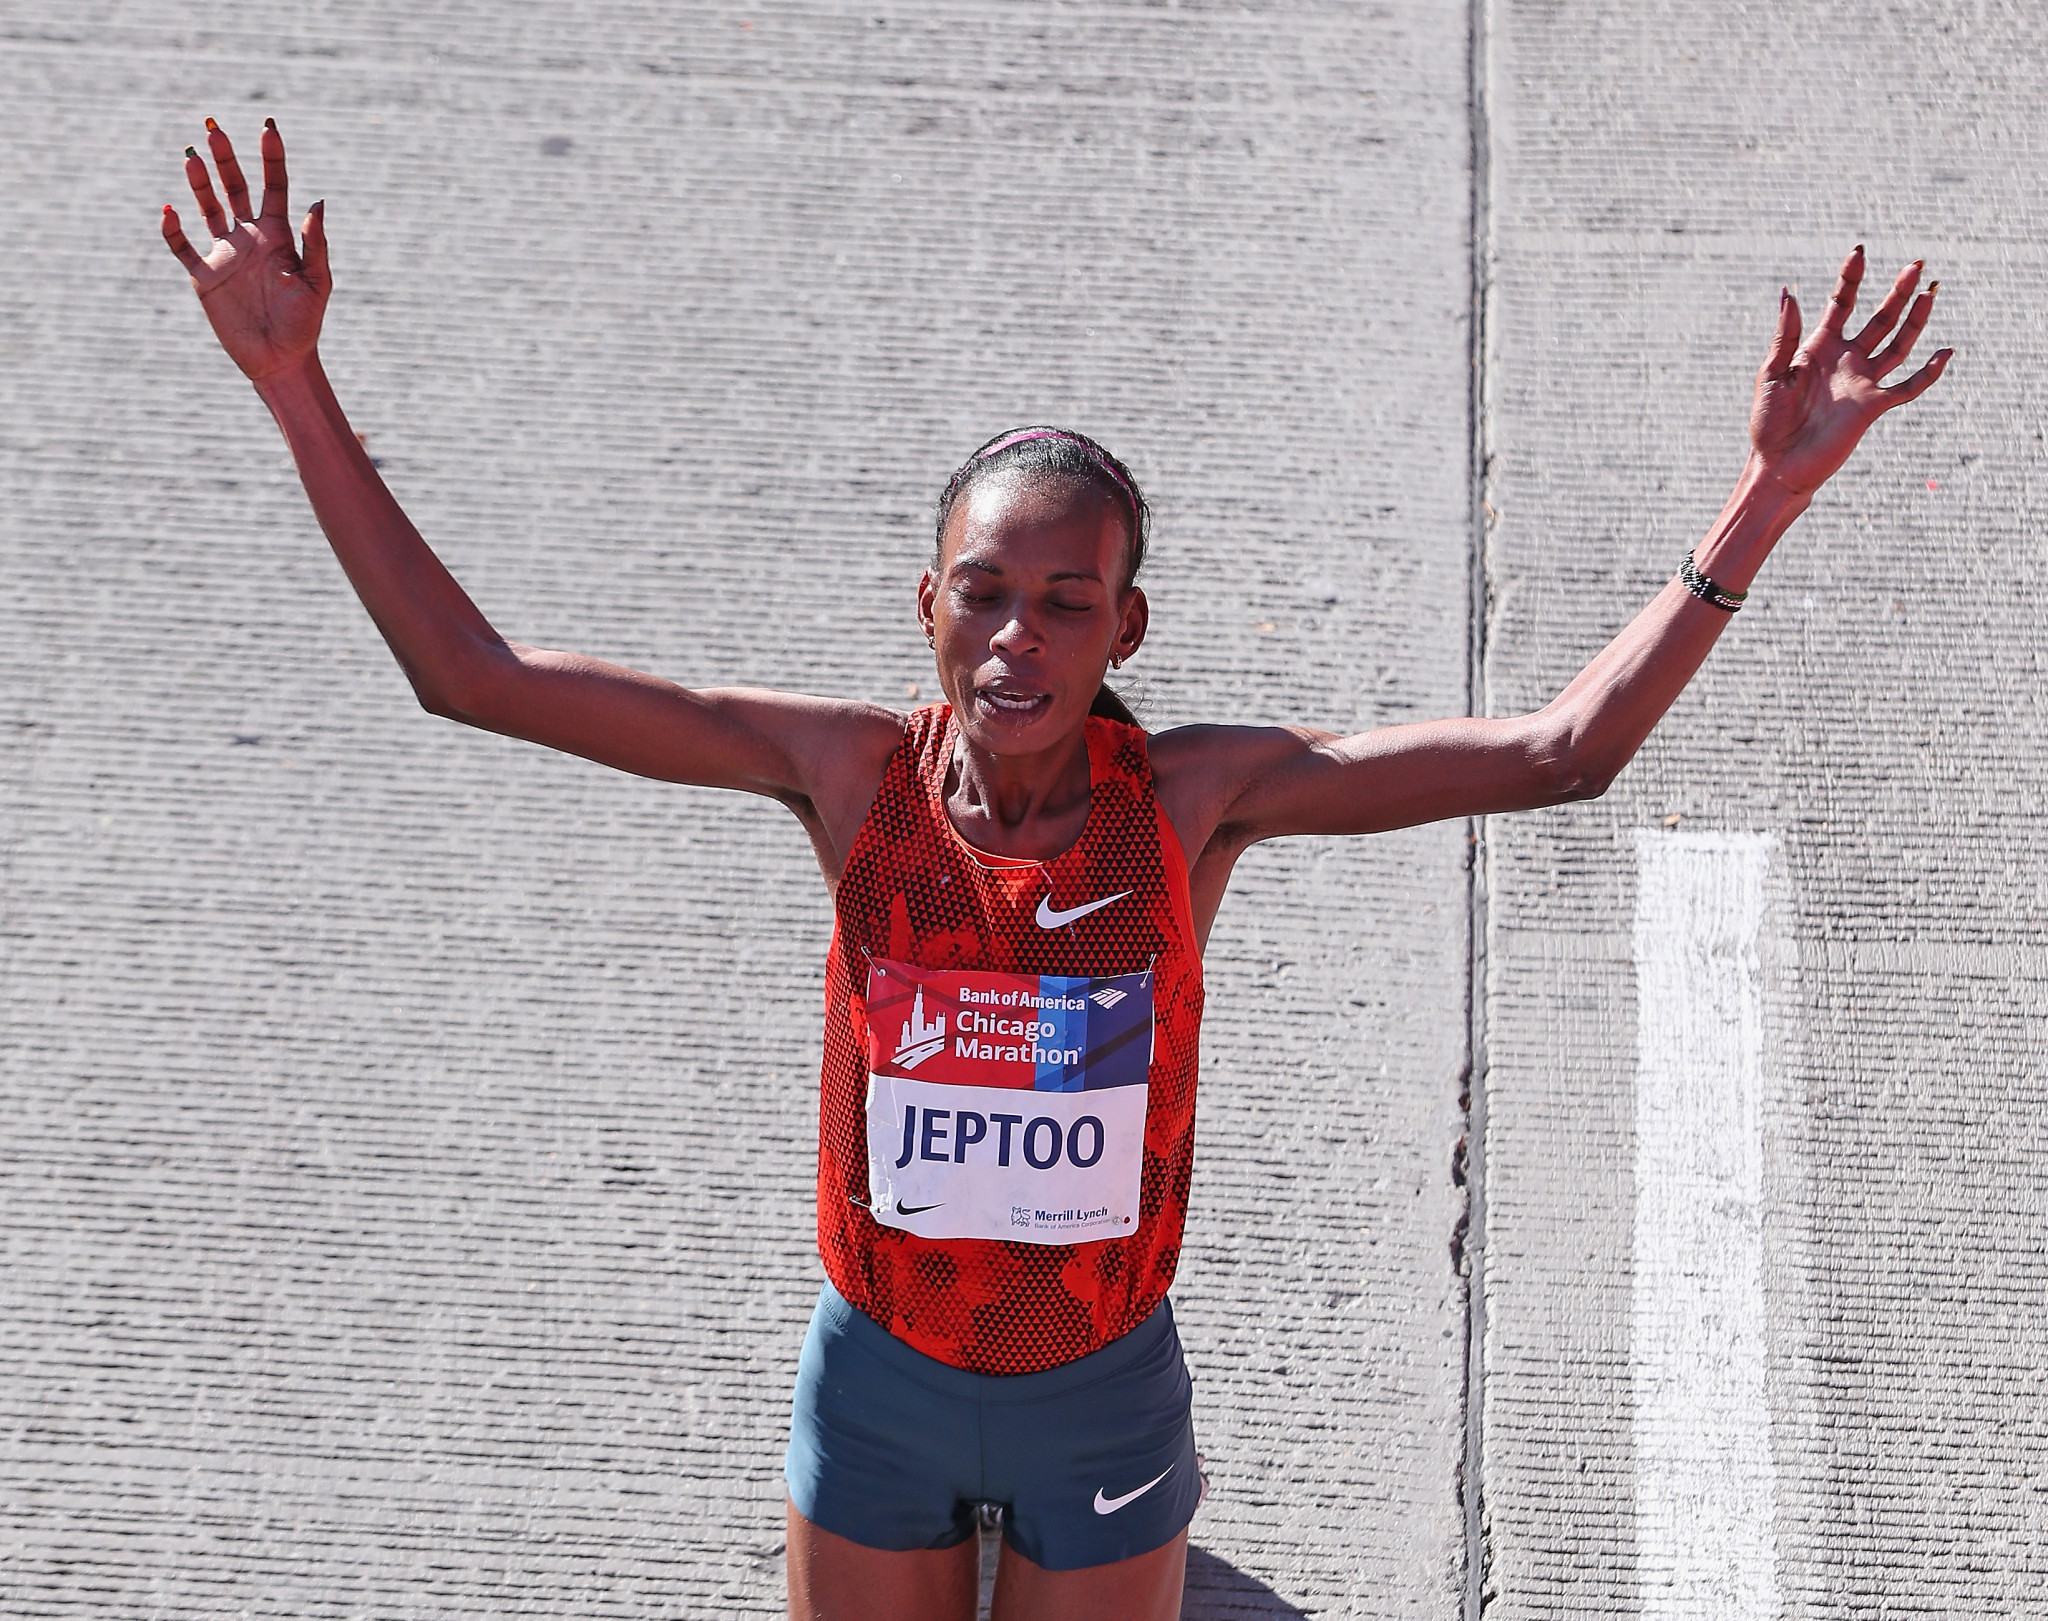 Rita Jeptoo was among the former winners to have been sanctioned for a doping offence ©Getty Images